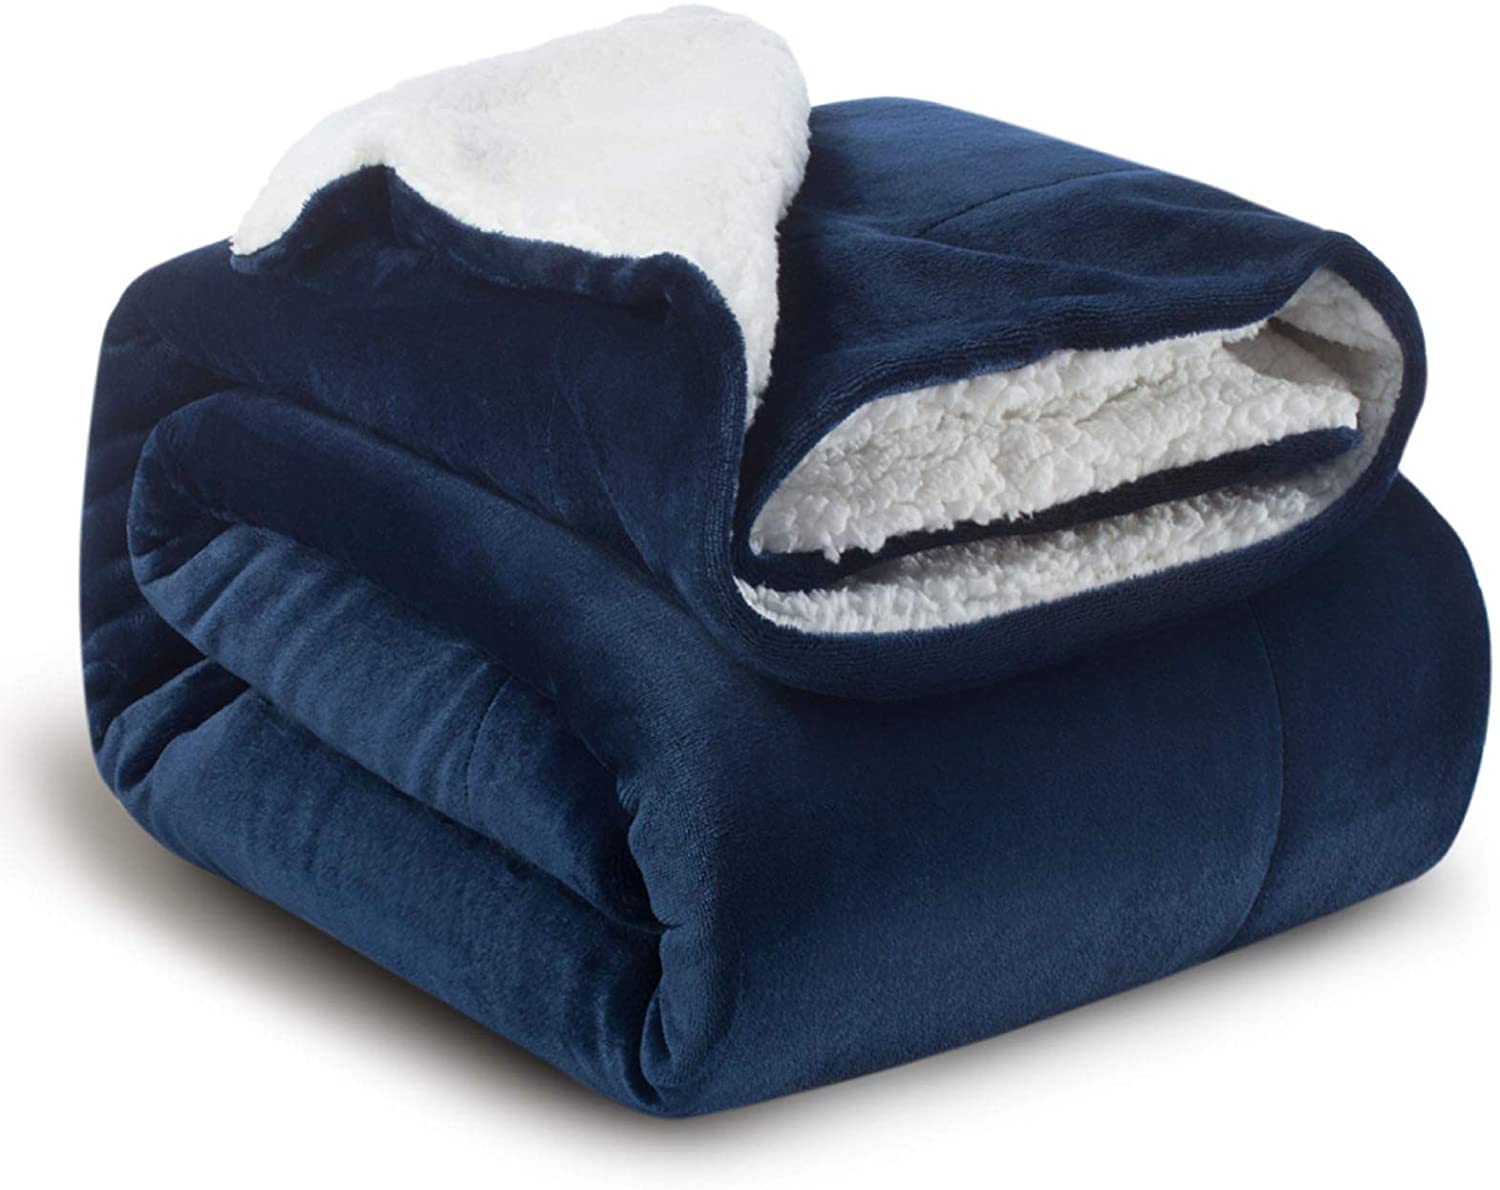 Navy Blue Thick Fuzzy Warm Soft Large Blankets King Size Bedsure Sherpa Fleece King Size Blanket for Bed 108x90 Inches